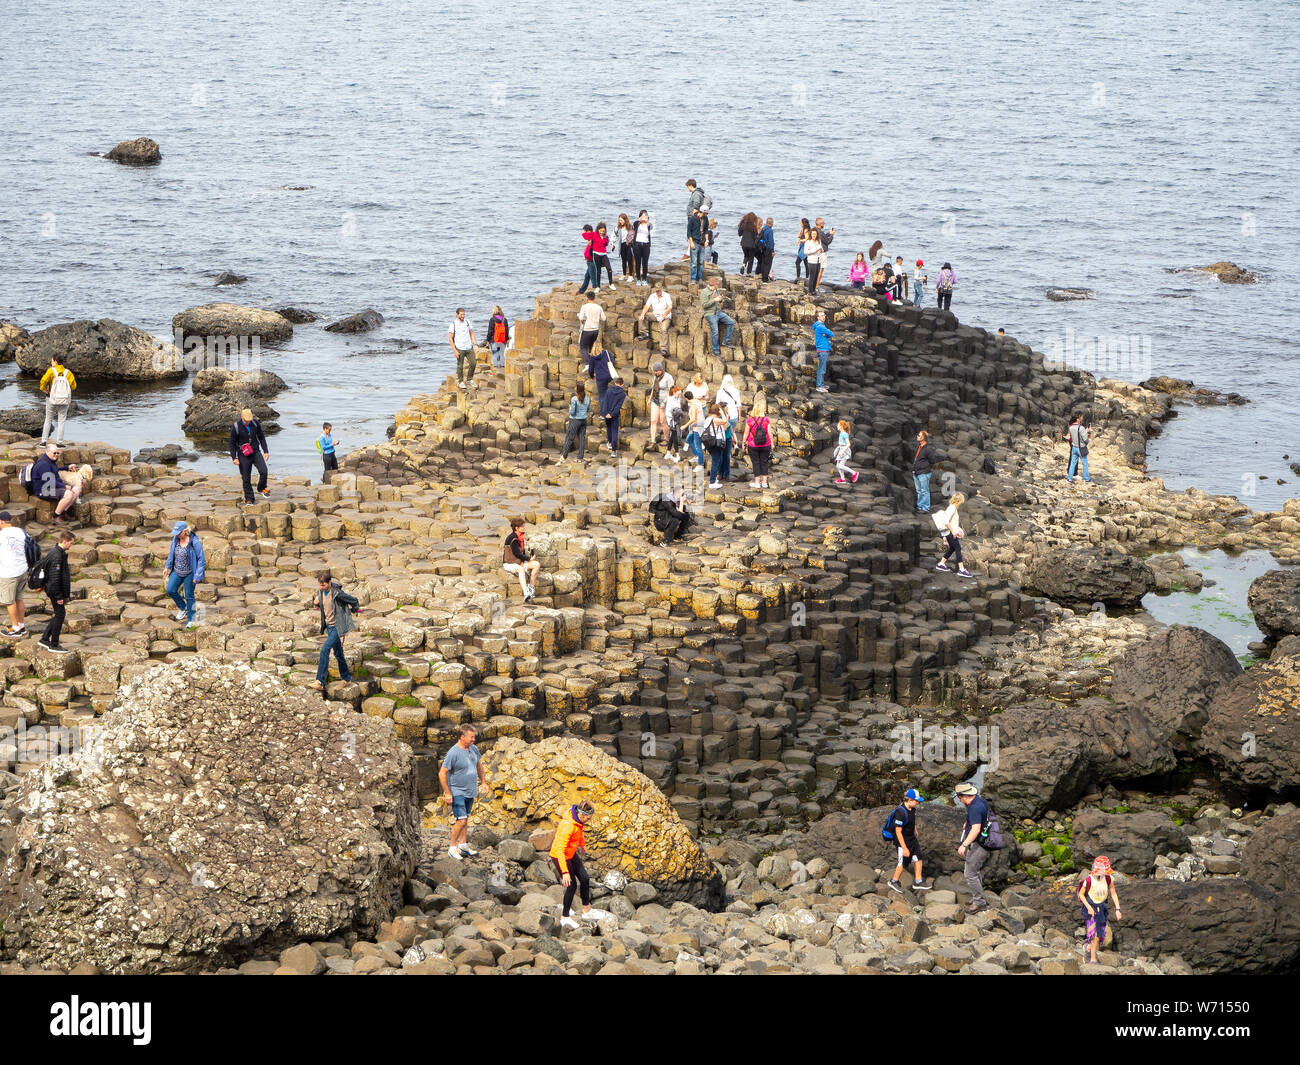 County Antrim, Northern Ireland, UK – July 17, 2019: Visitors on Giant’s Causeway, unique hexagonal geological formation of volcanic basalt rocks. Stock Photo